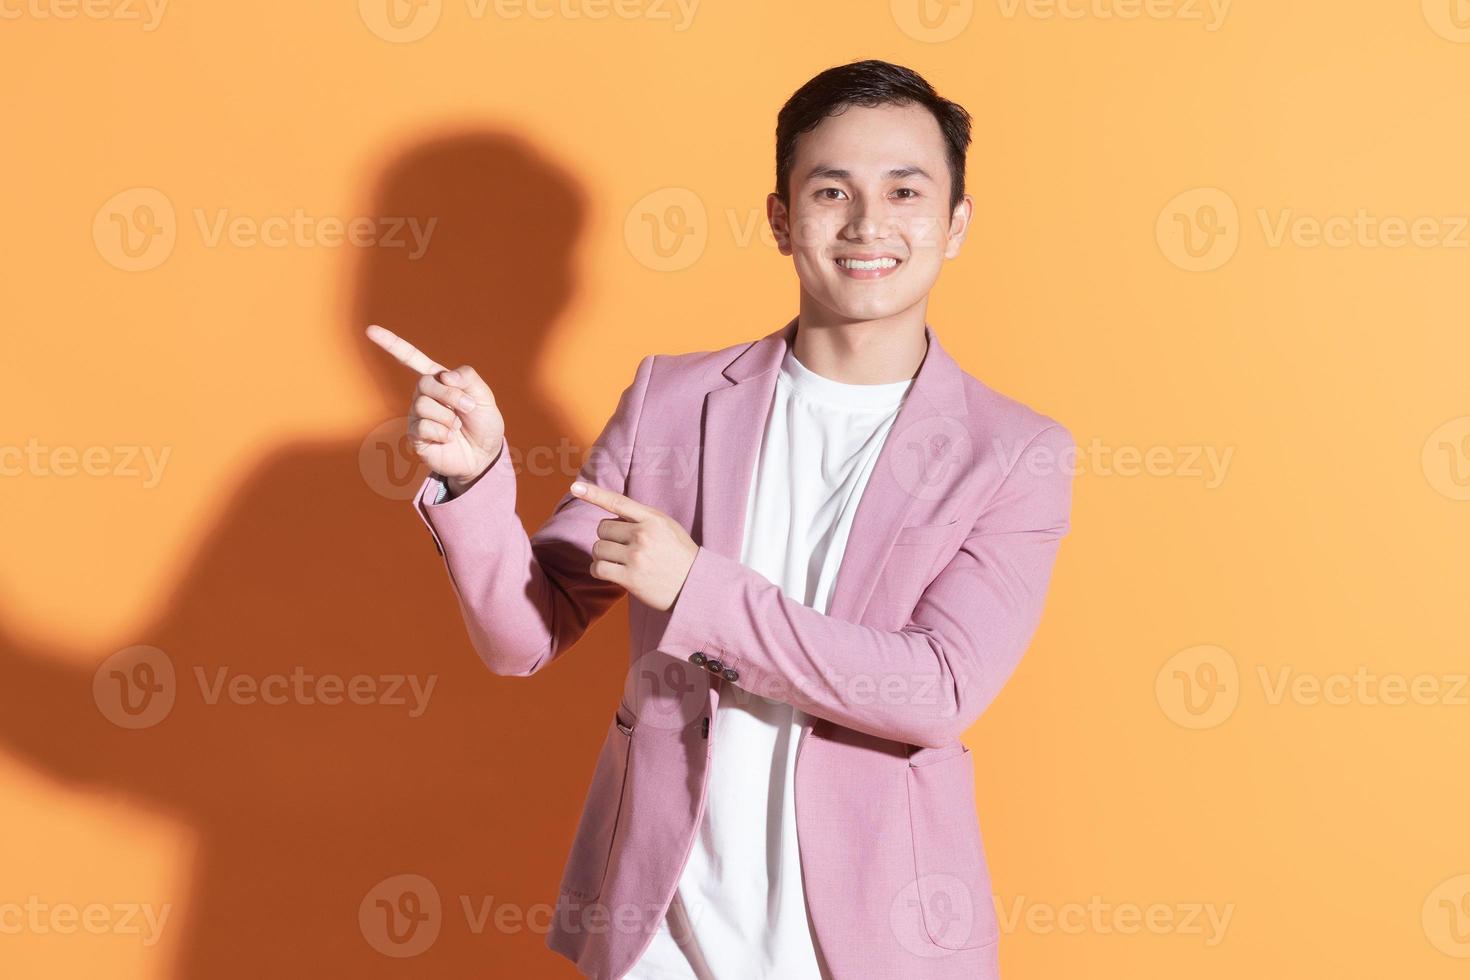 Portrait of young Asian man posing on background photo